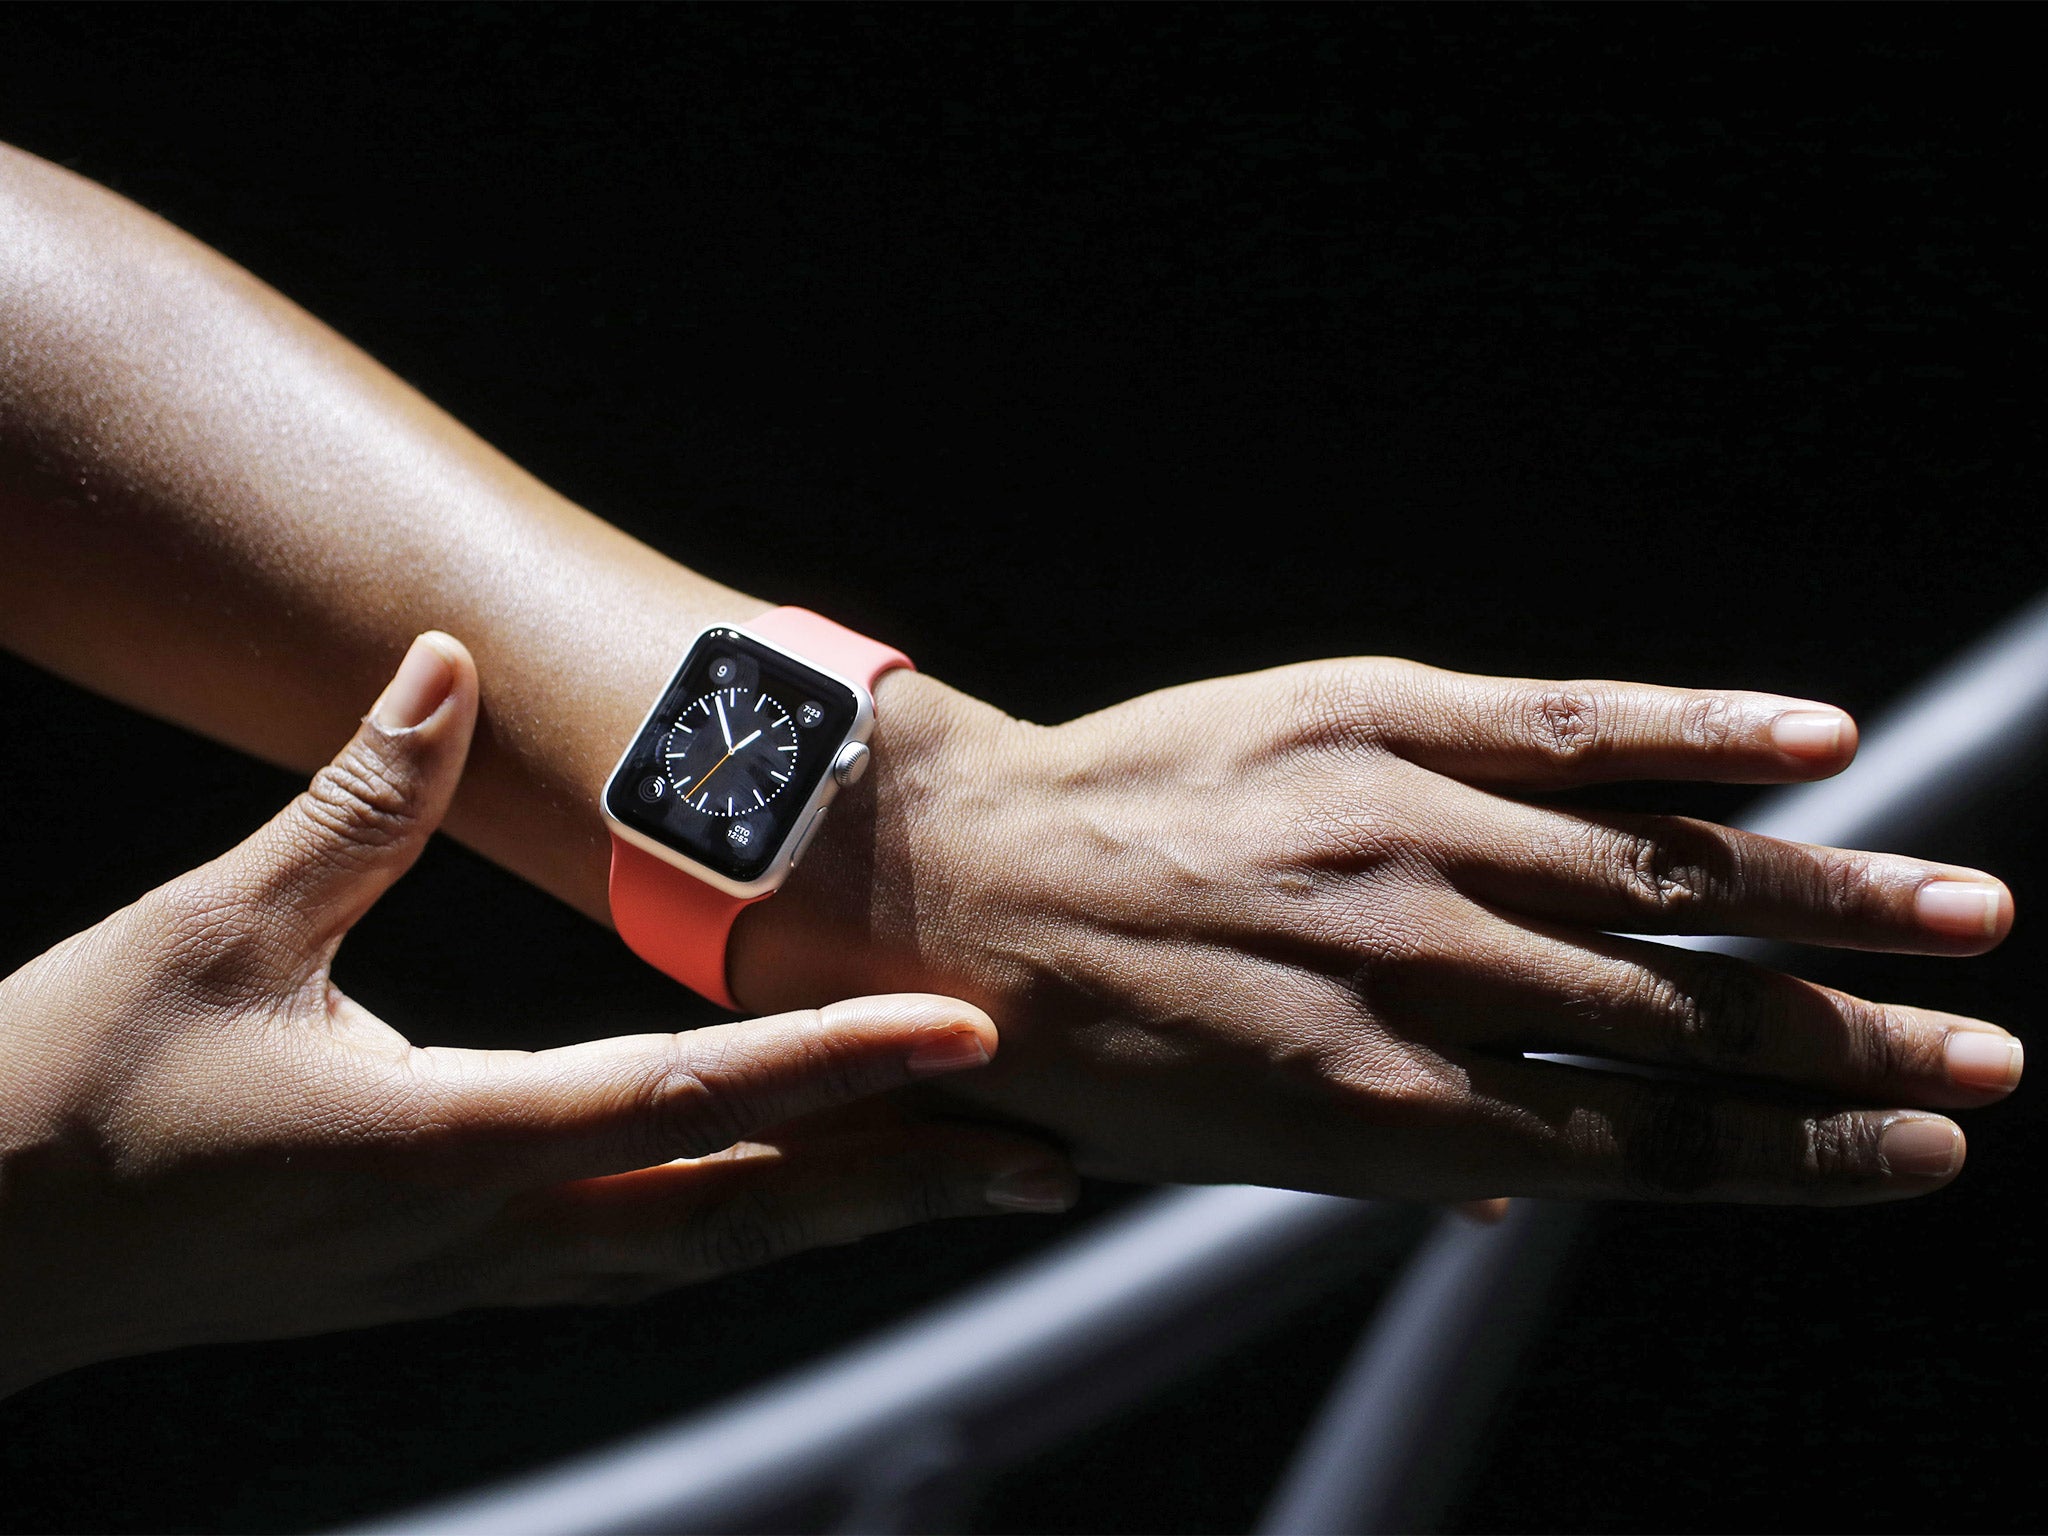 Hands on: Apple Watch’s timekeeping is precise to within 50 milliseconds